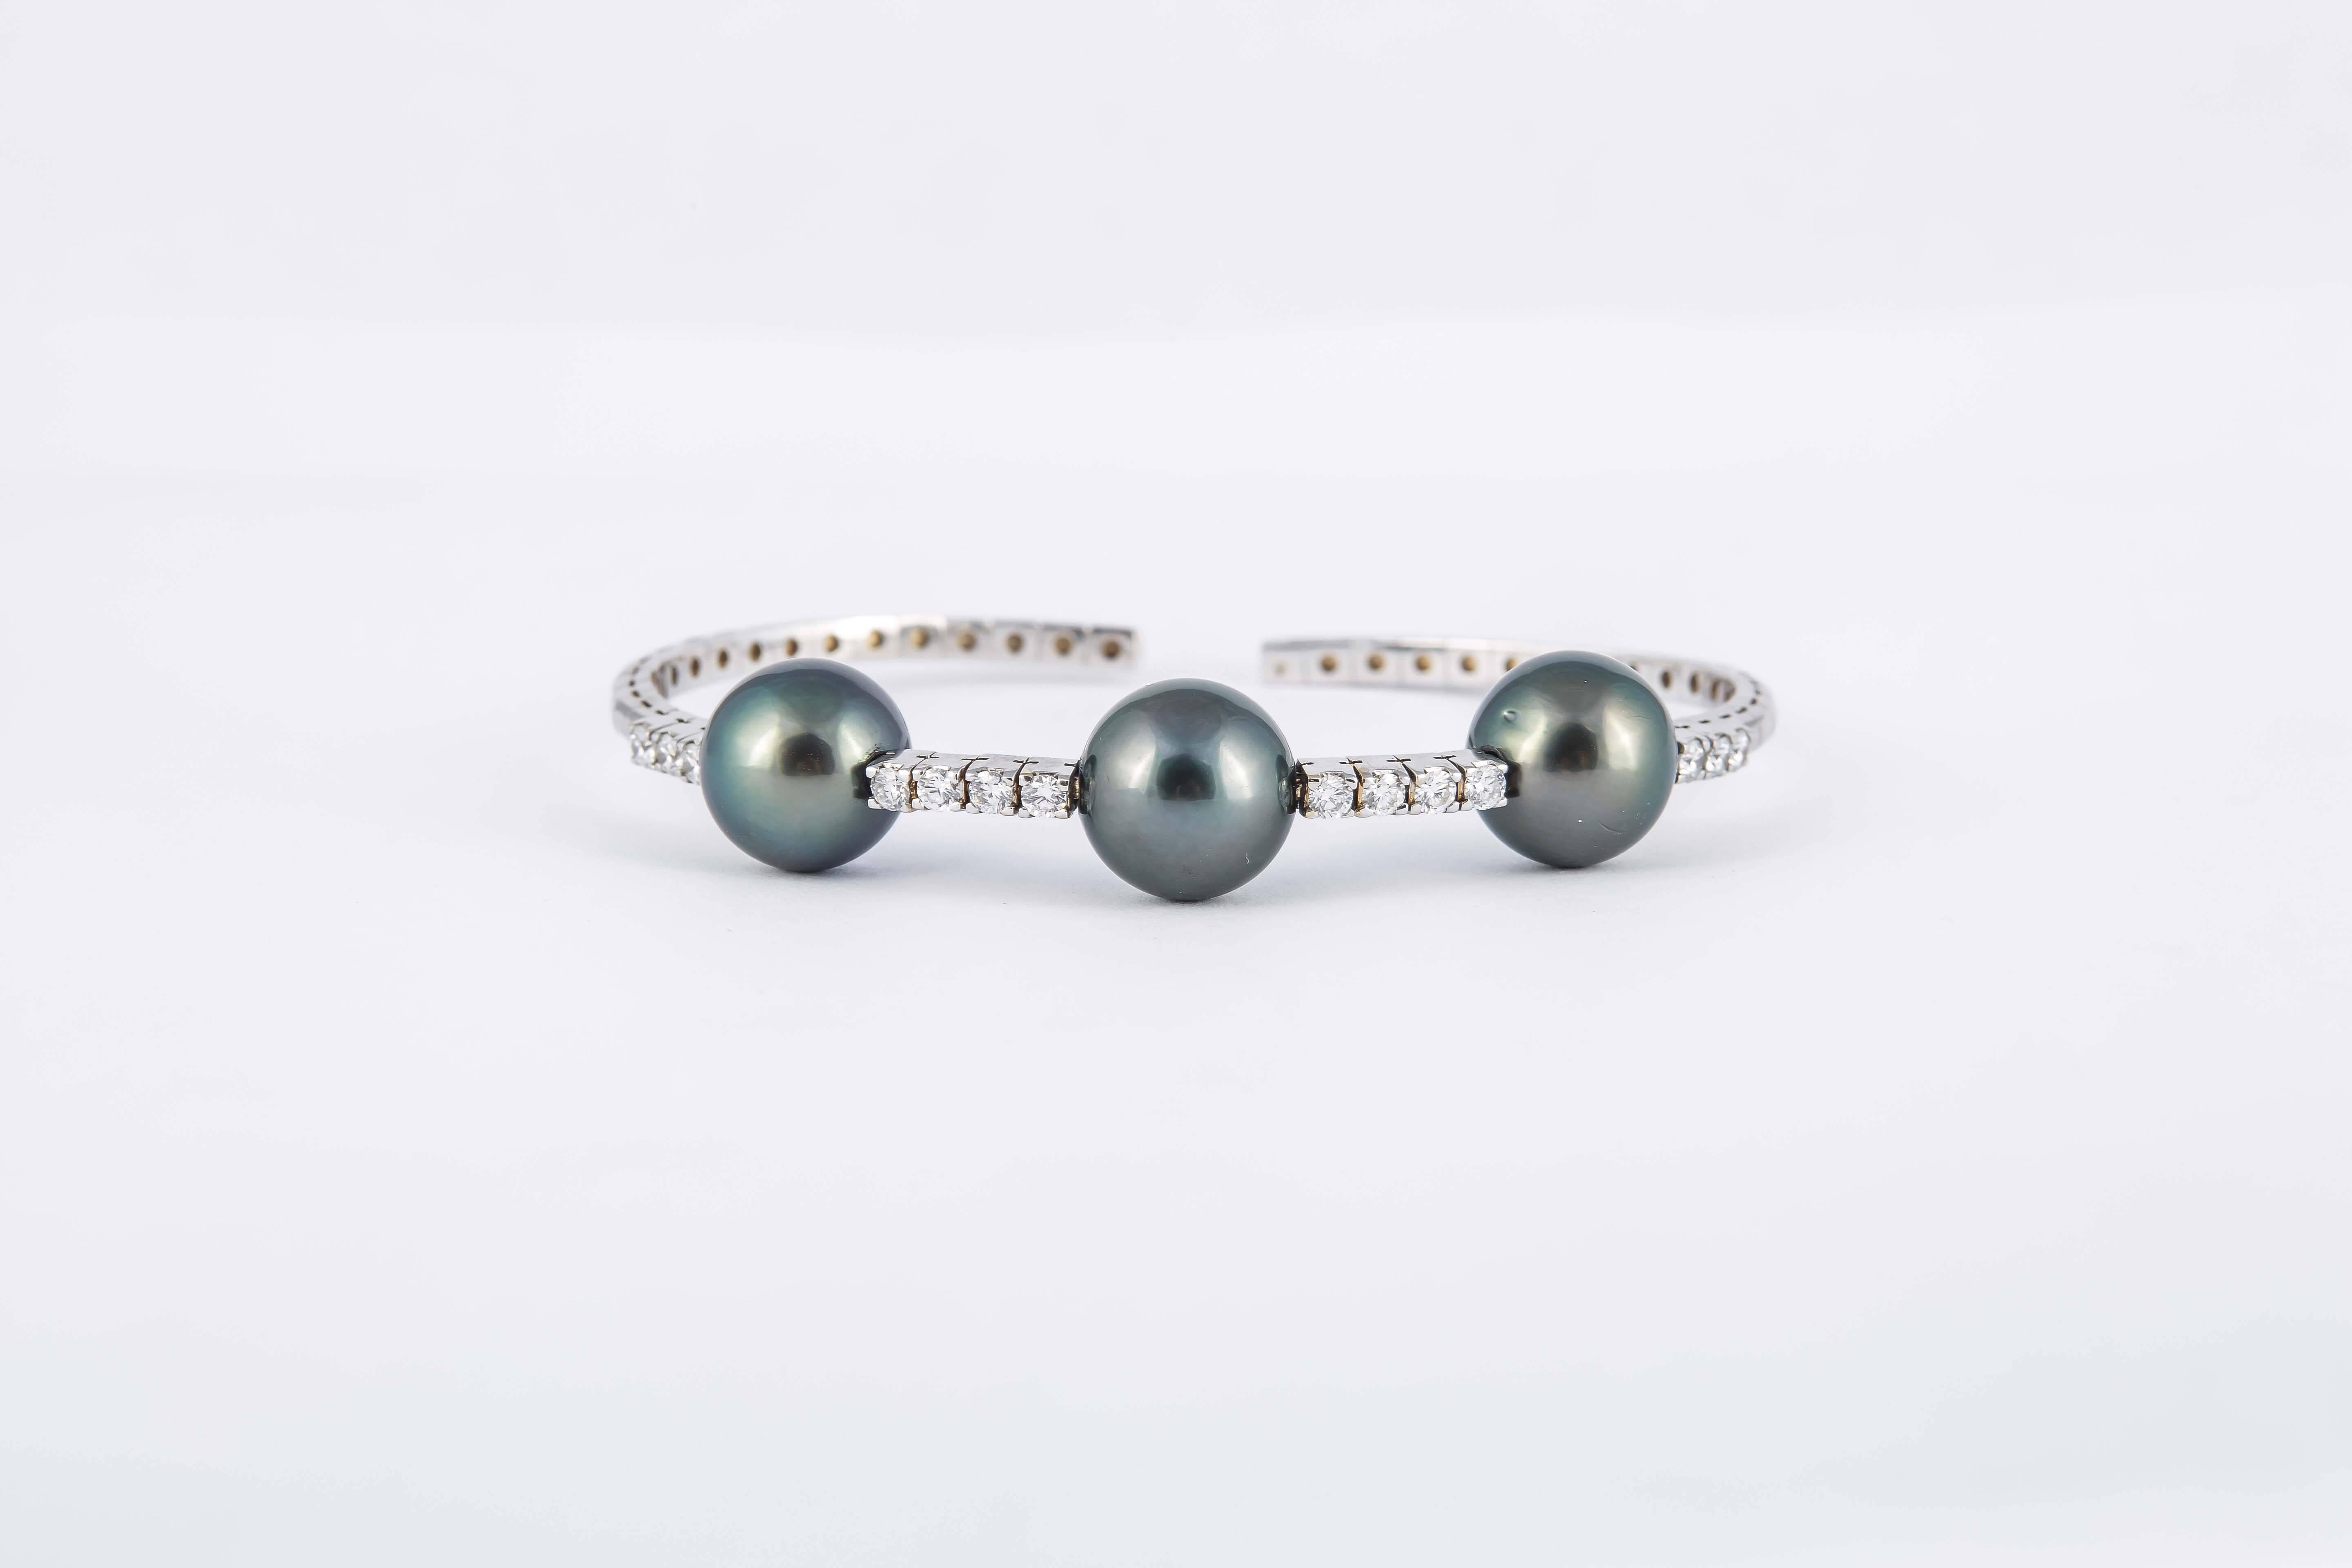 Tahitian Cultured Pearl 11+ mm
18K White Gold
Diamonds 0.74 cts.
